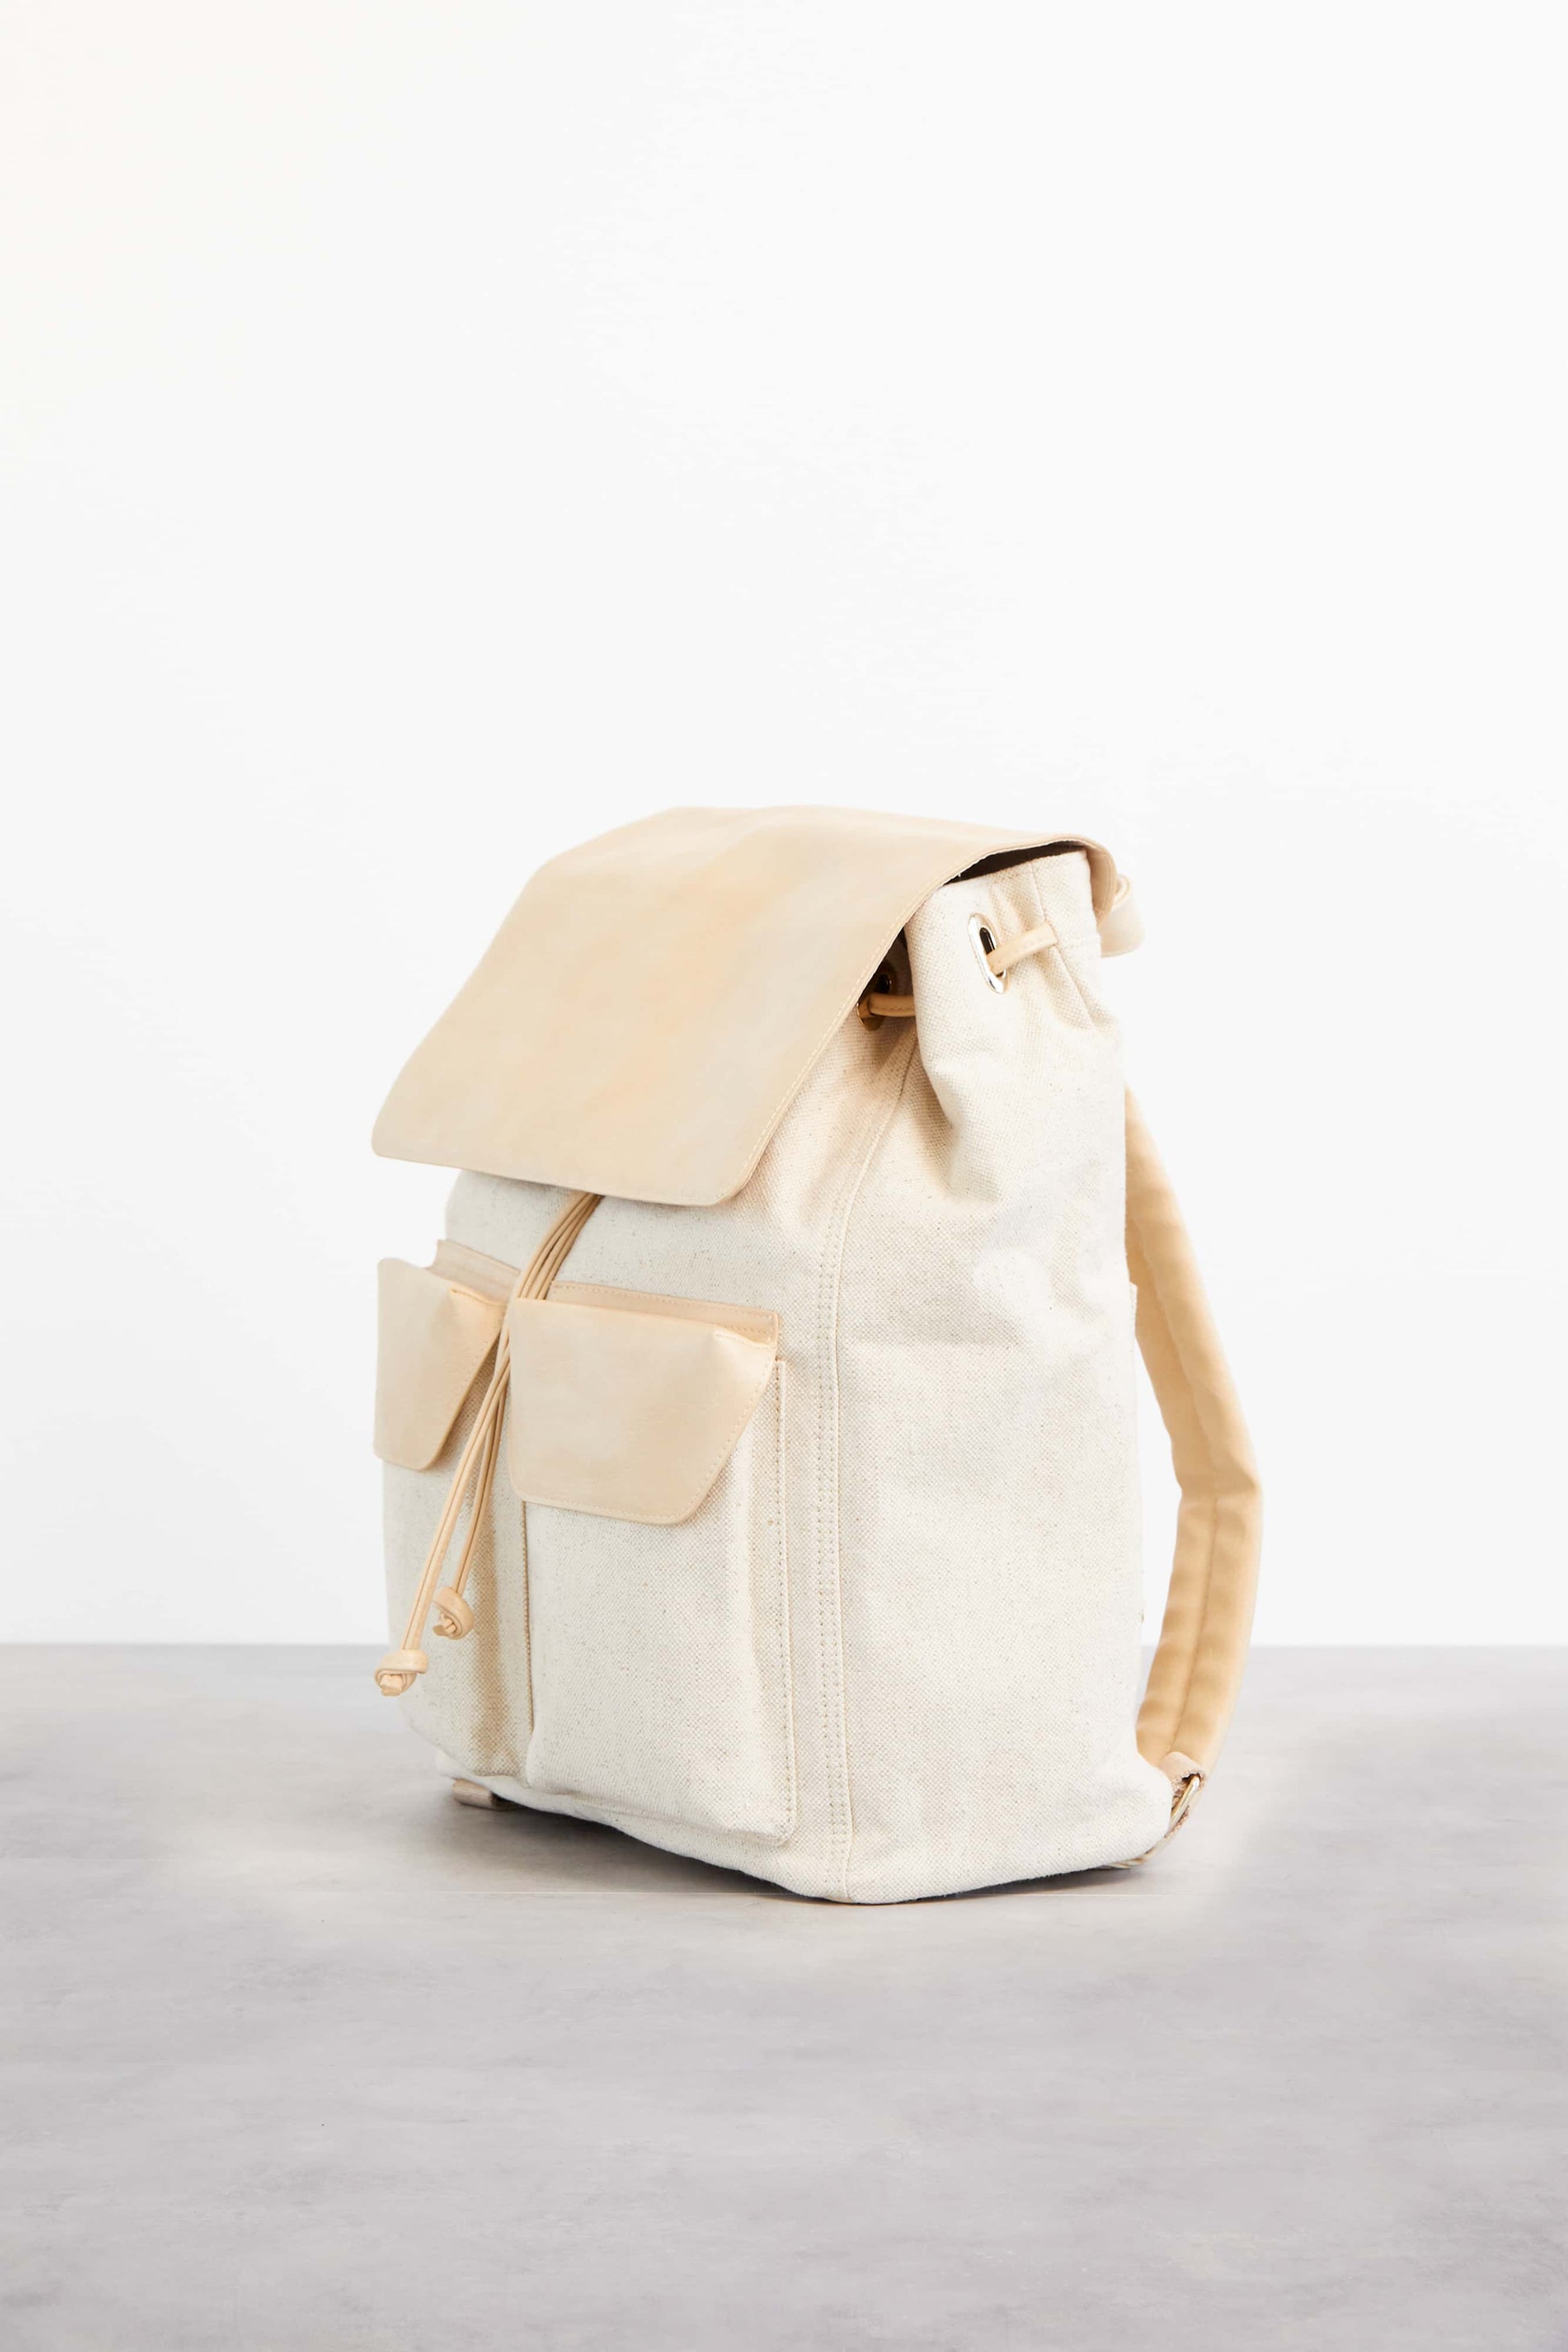 Rucksack in Beige Front and Side 